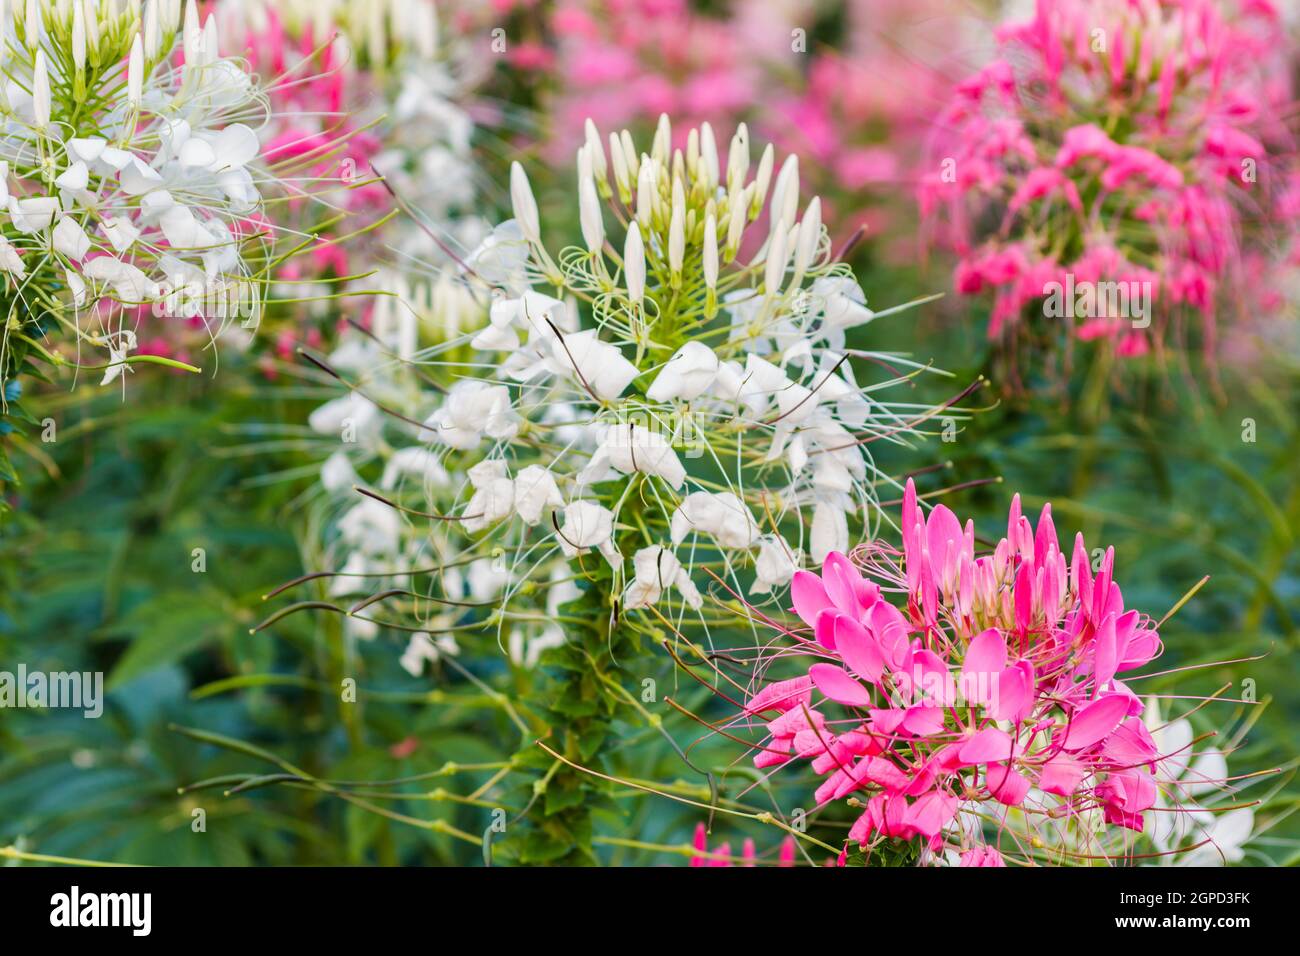 Pink And White Spider flower(Cleome hassleriana) in the garden for background use. Stock Photo